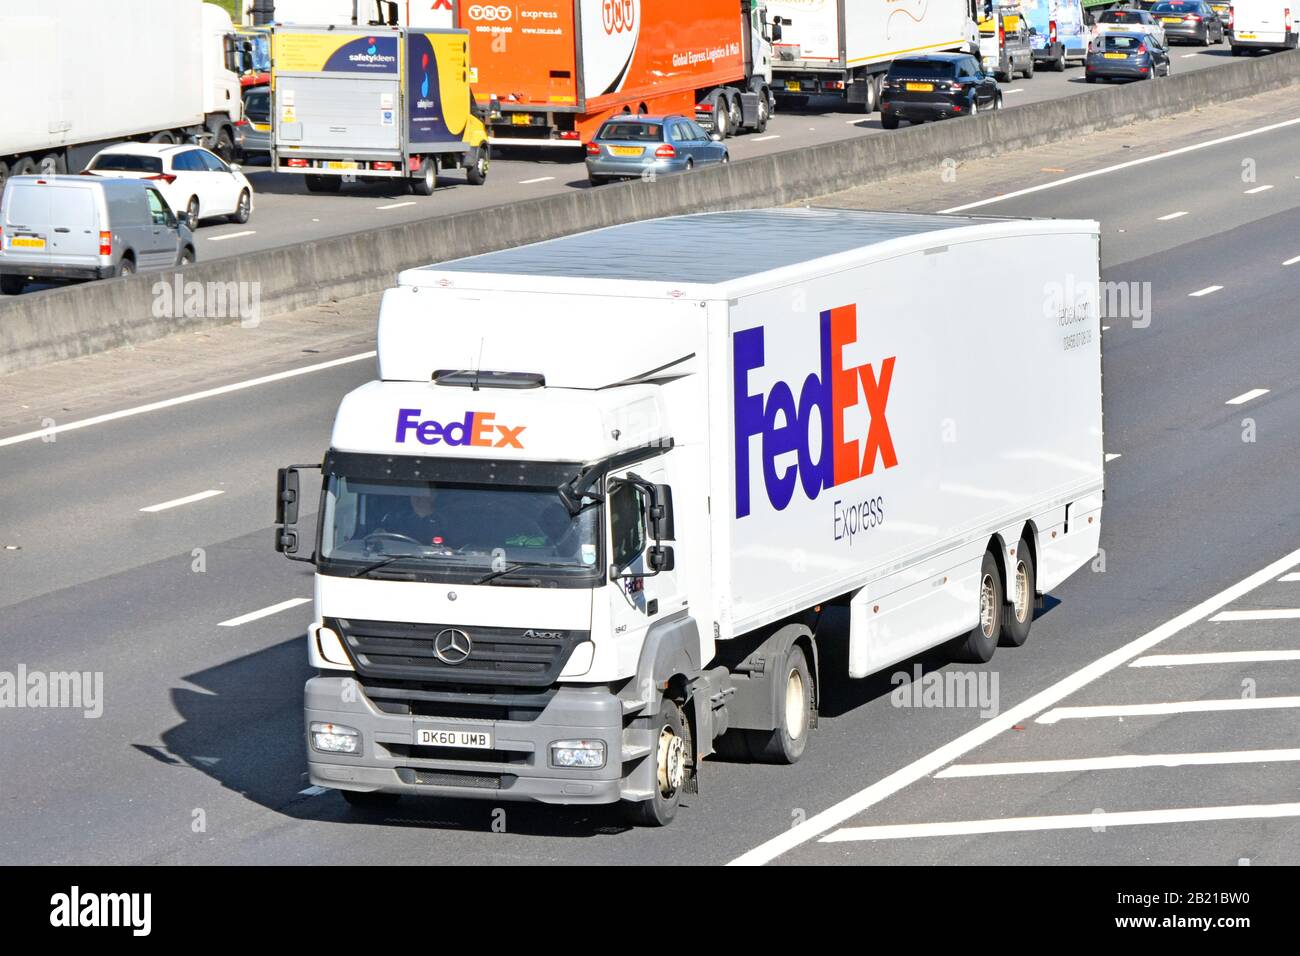 View from above side & front of FedEx  Express an American courier post & mail business with company logo on hgv lorry truck & trailer on UK motorway Stock Photo